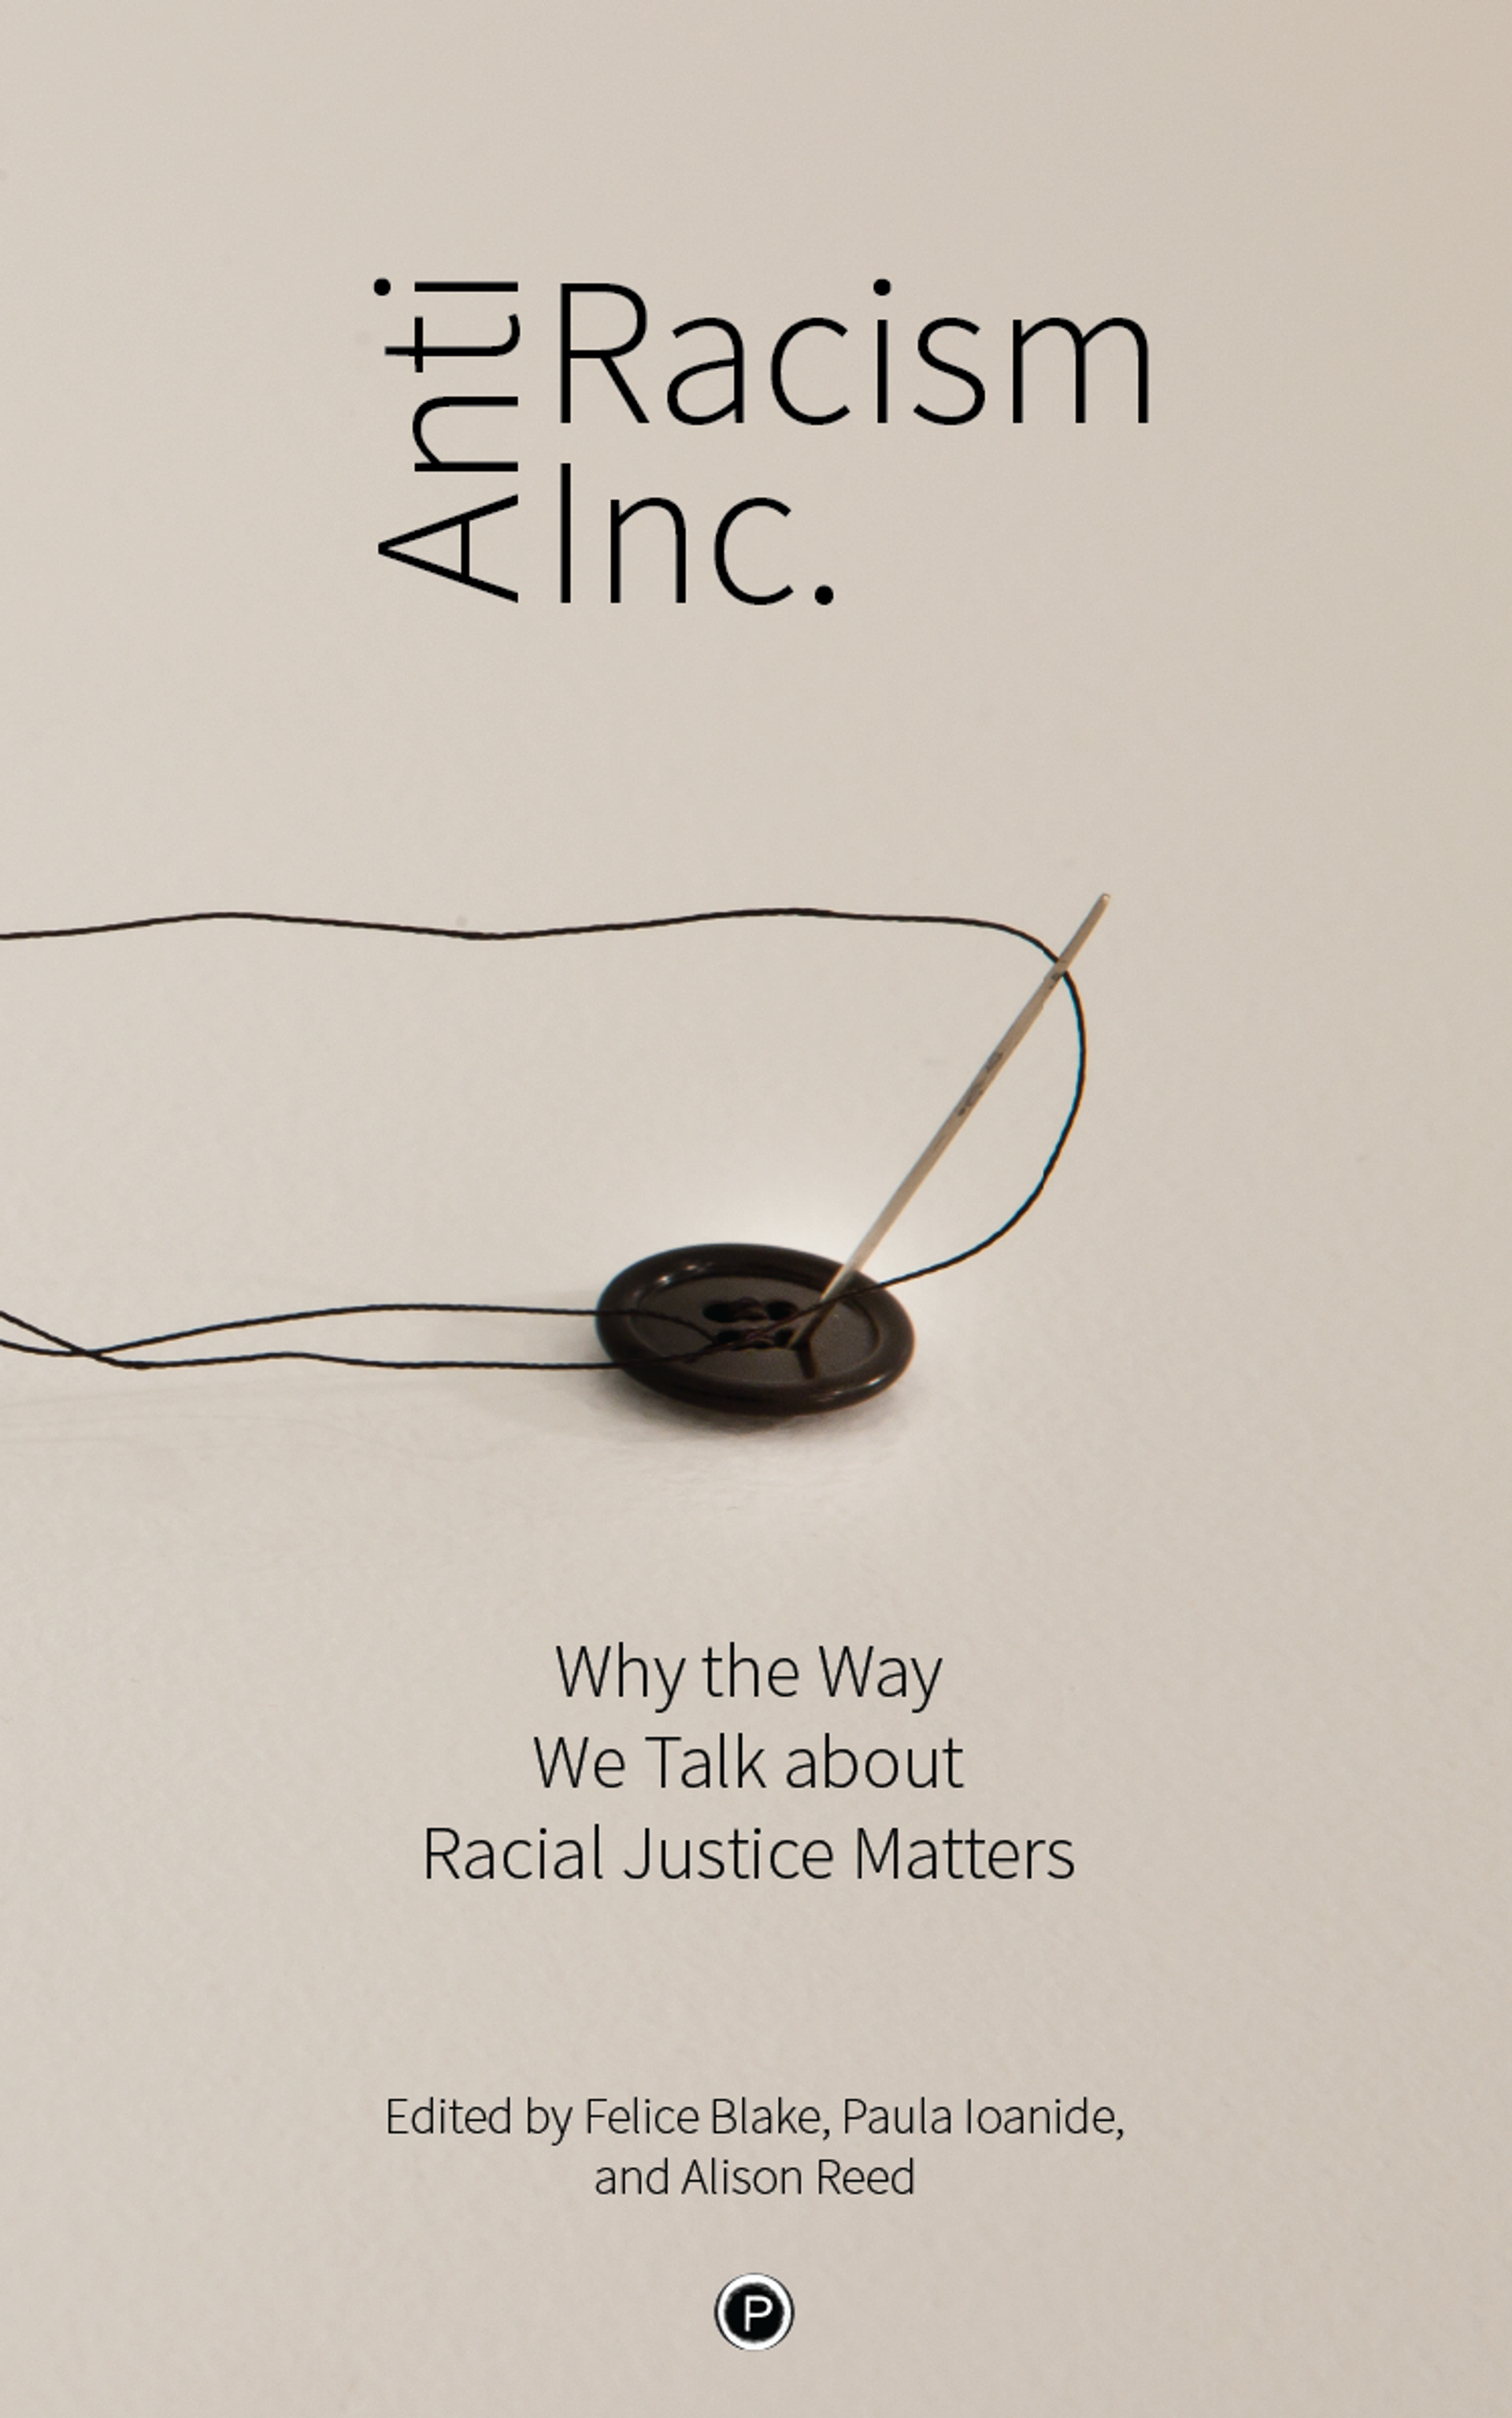 Cover of book titled Antiracism Inc.: Why the Way We Talk About Racial Justice Matters